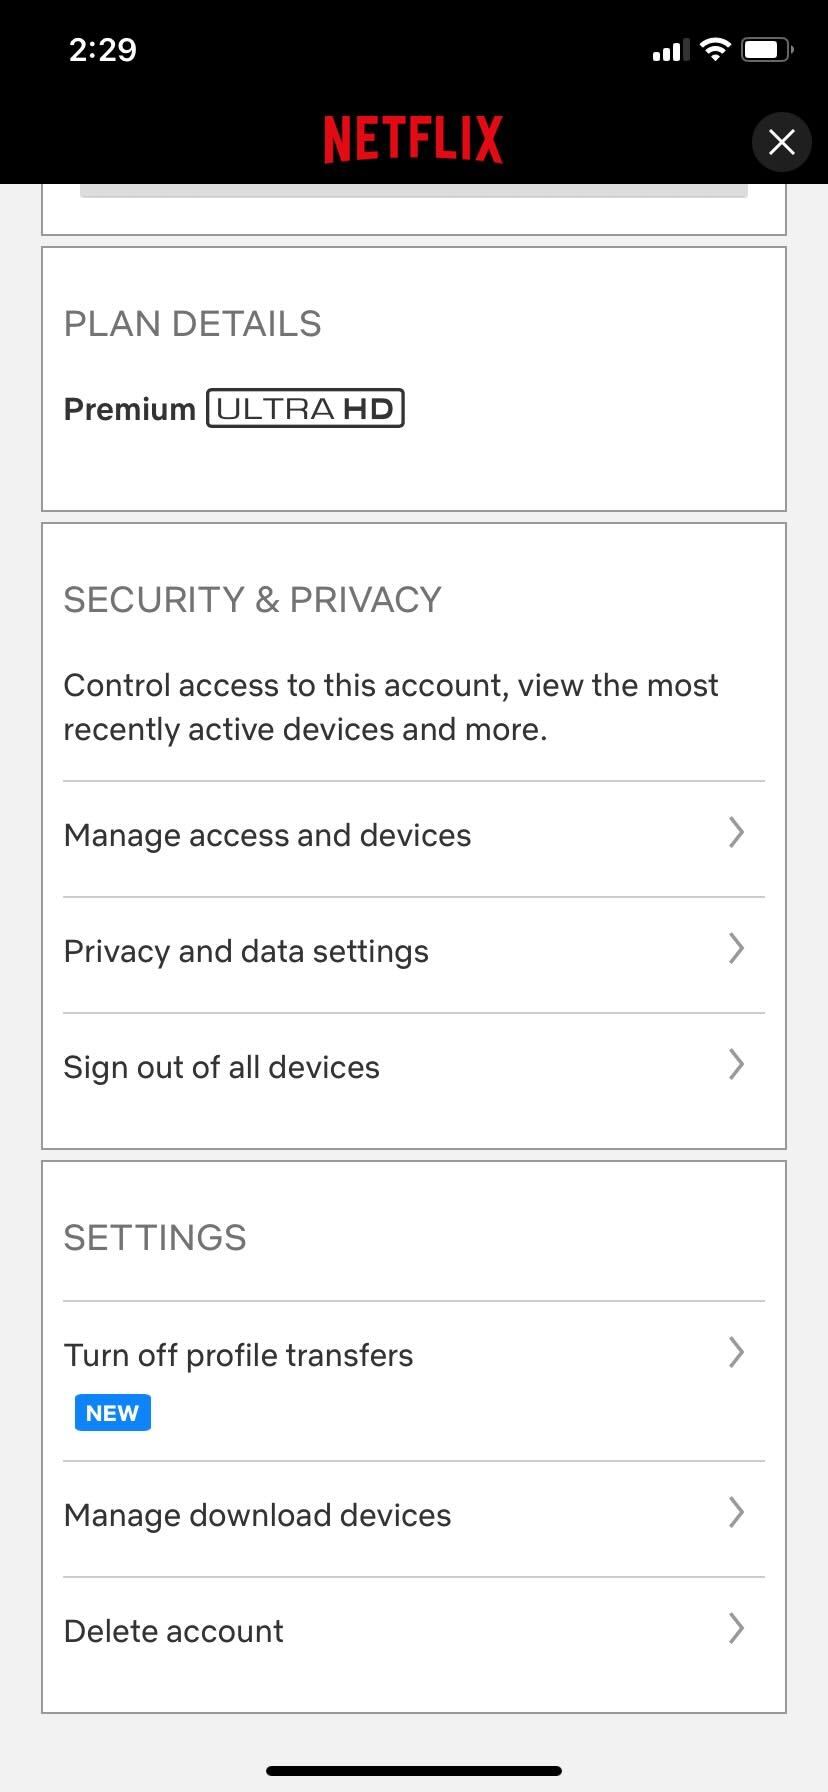 Netflix app Manage access and devices option